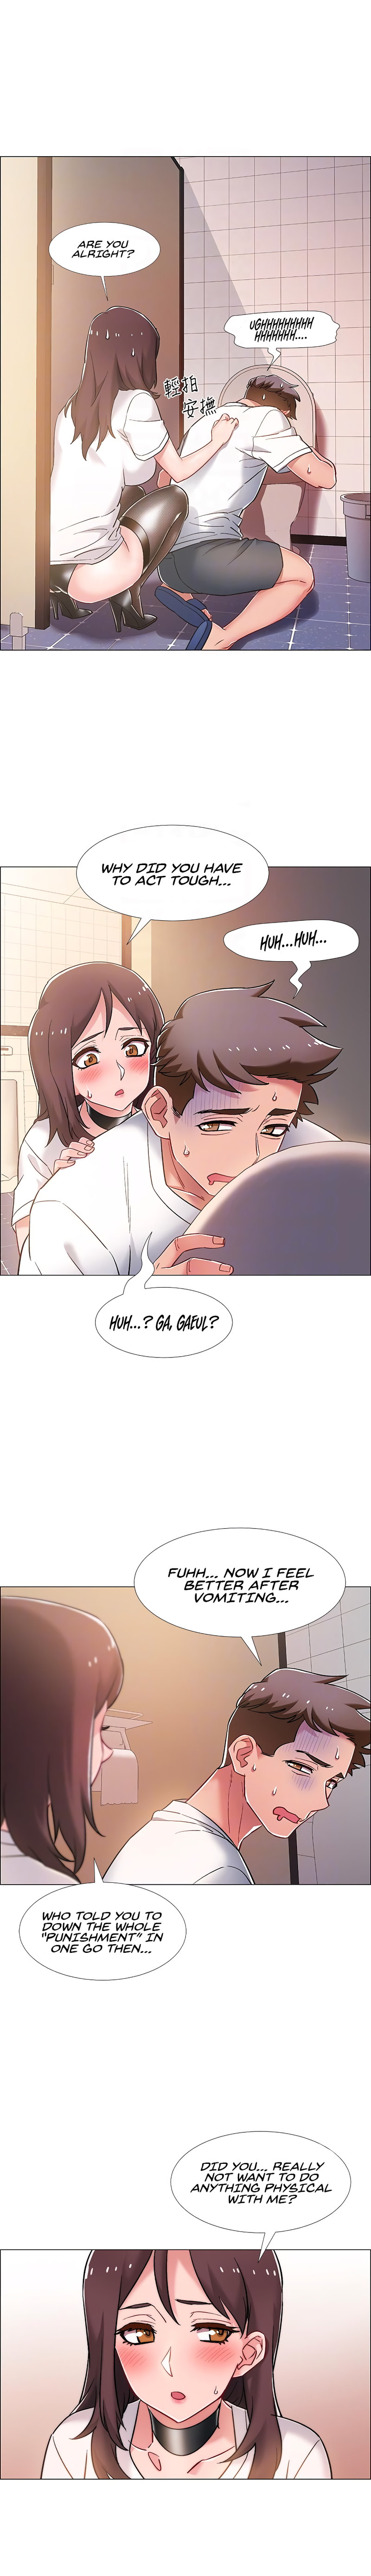 Enlistment Countdown - Chapter 12 Page 8